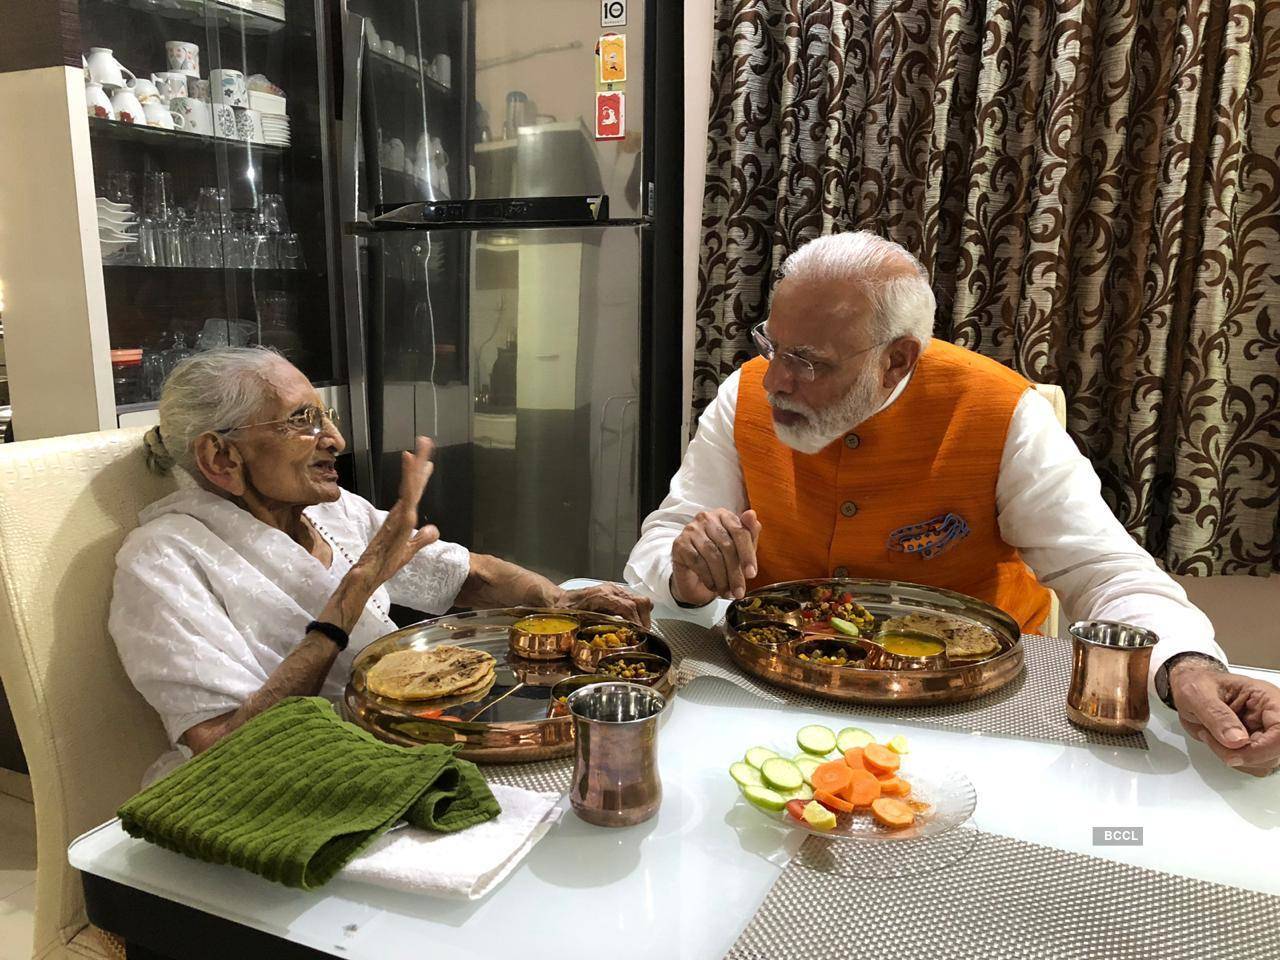 69th birthday: PM Modi meets mother over lunch